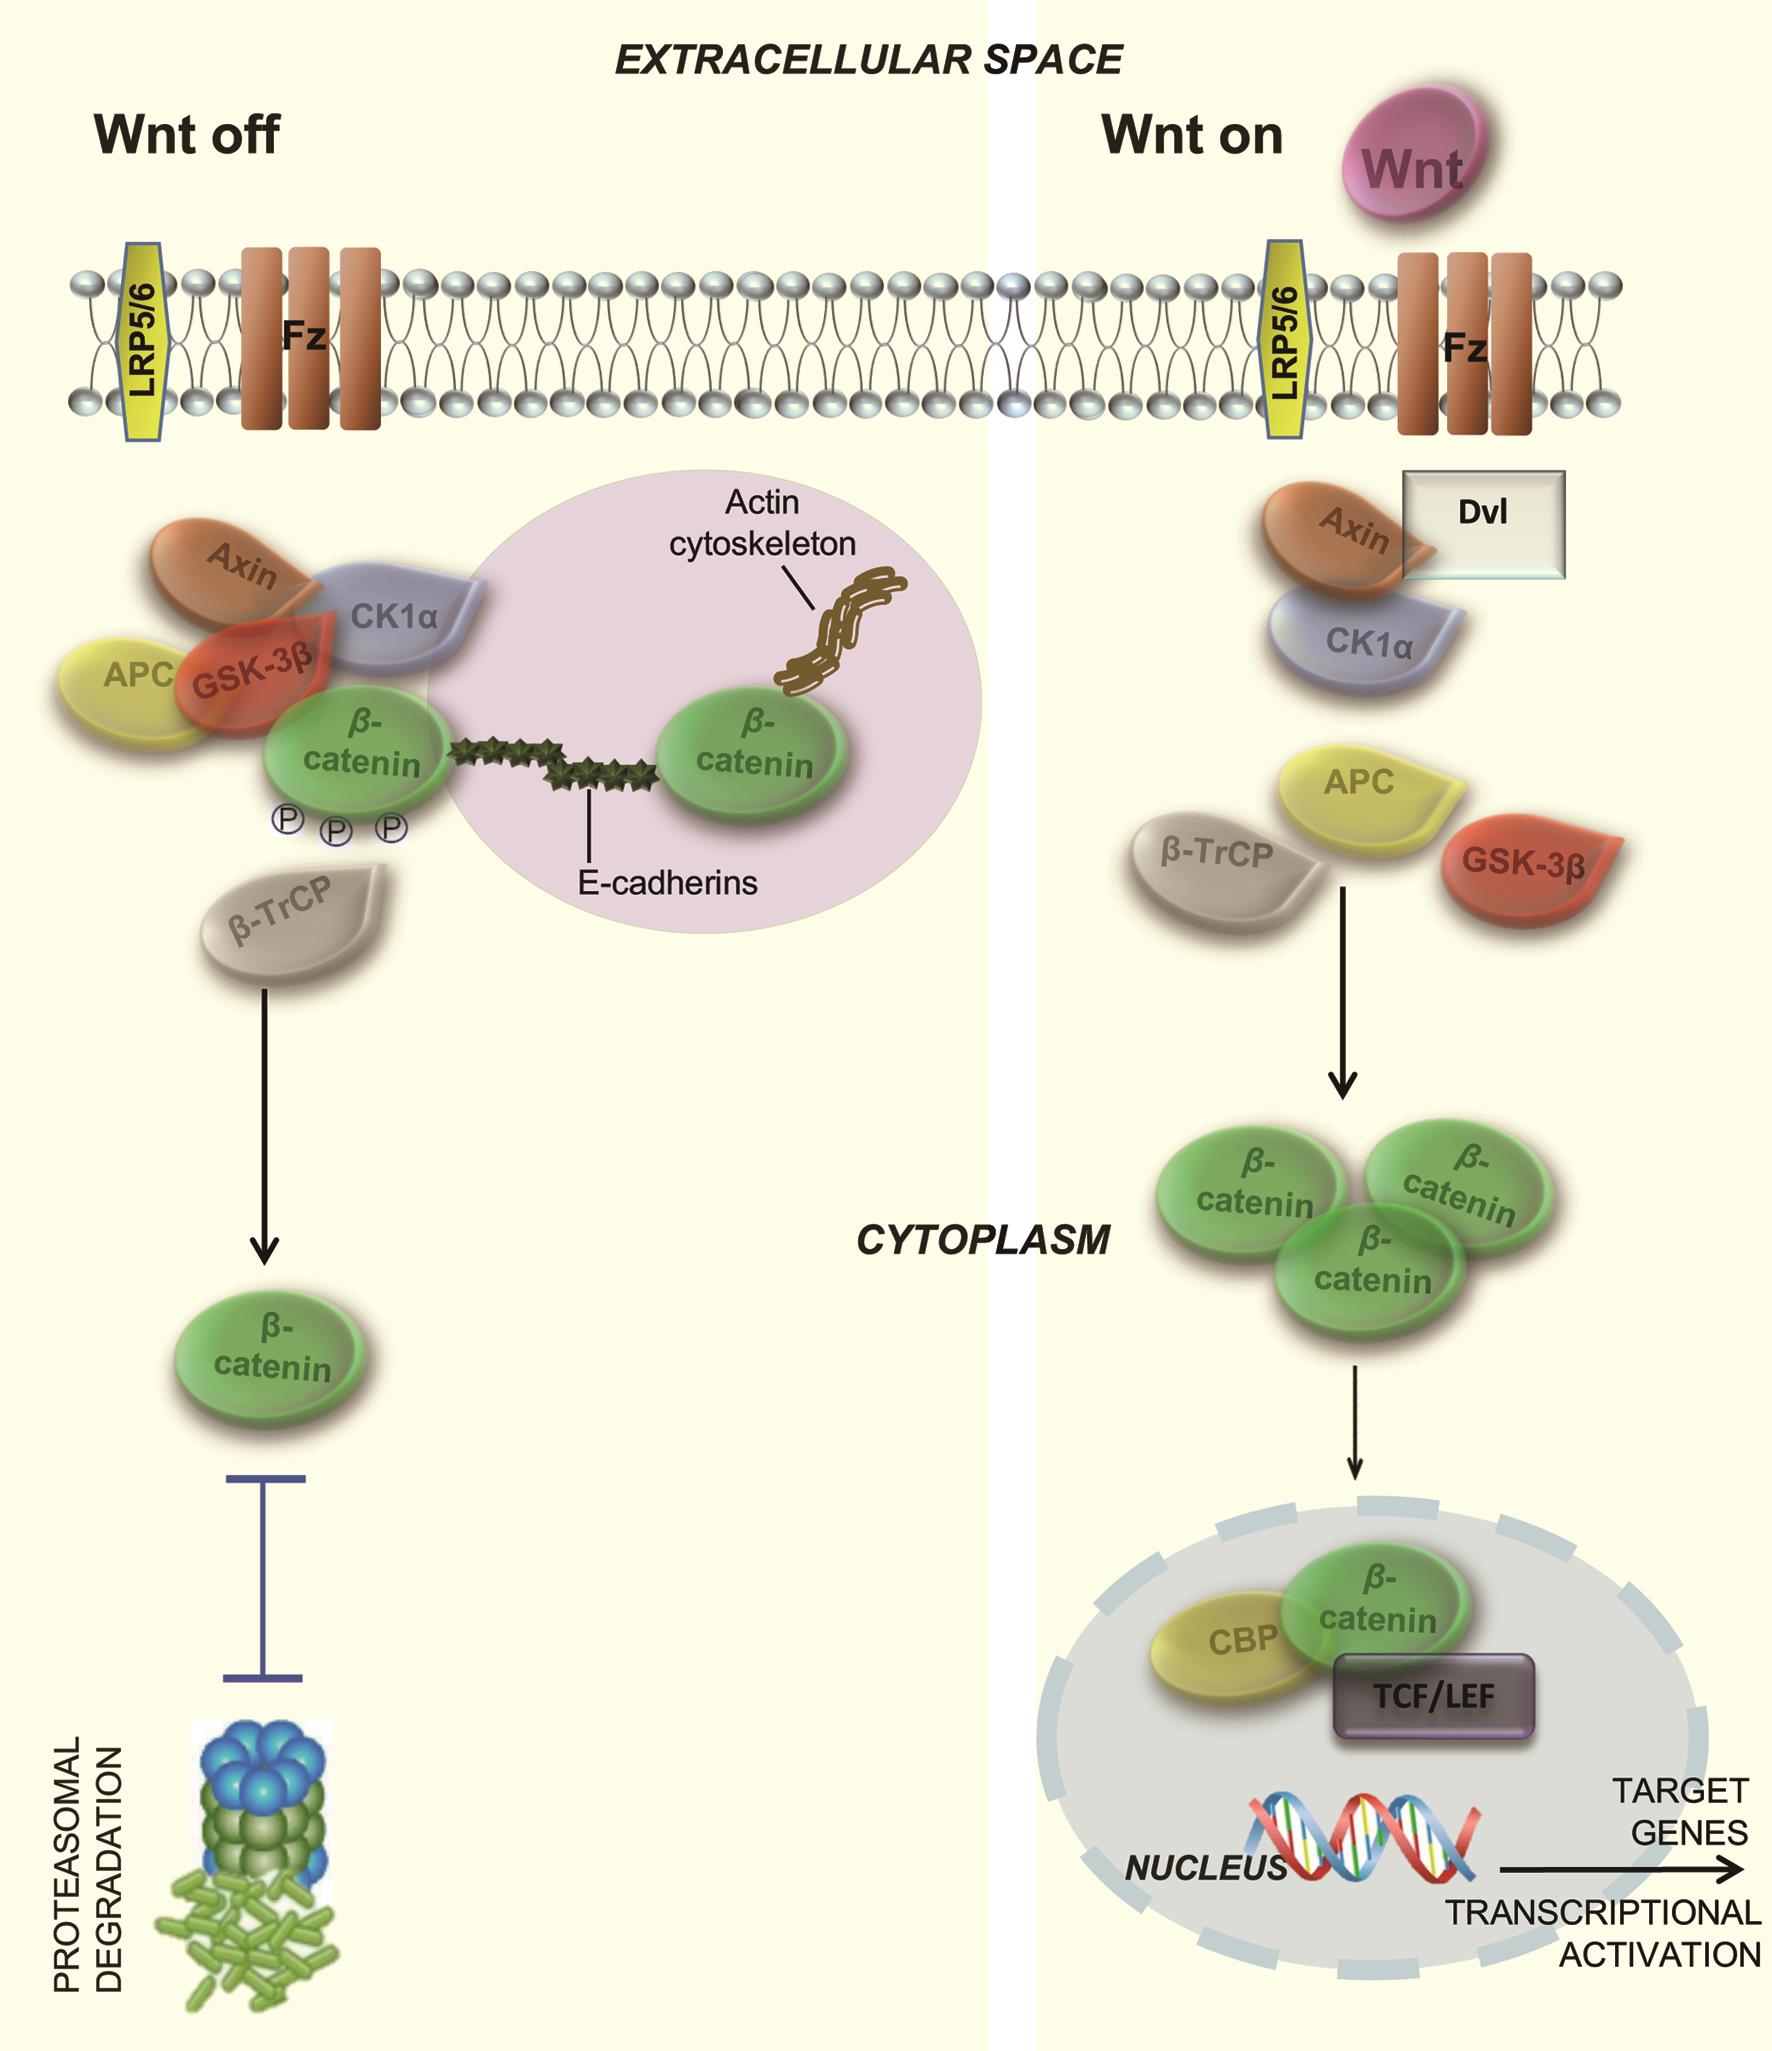 Activated and inactivated canonical Wnt signaling.